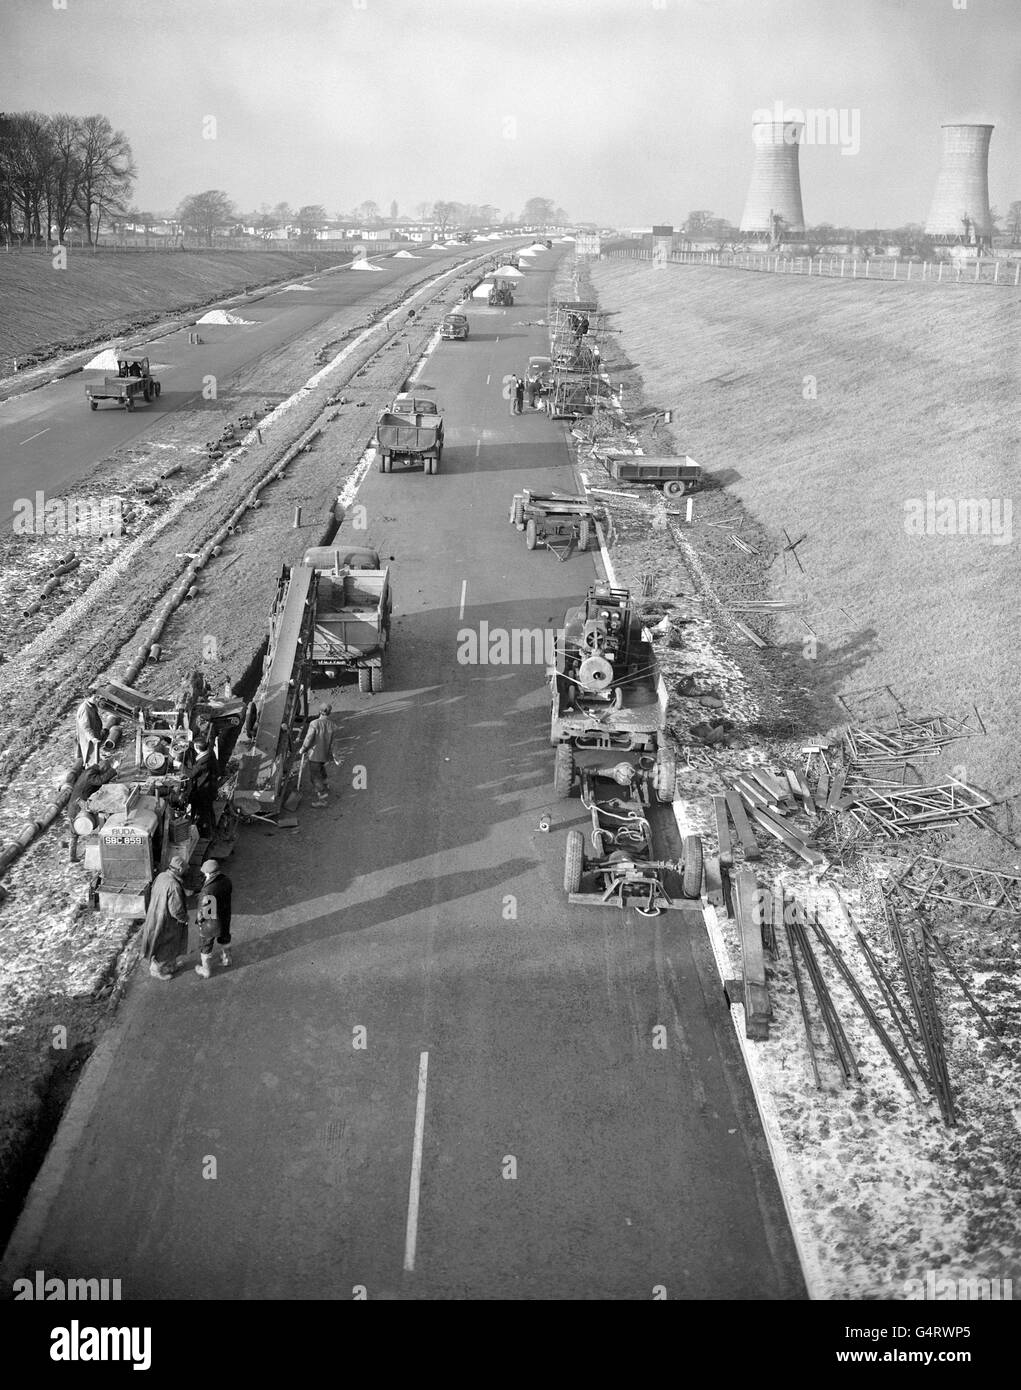 The Preston by-pass which is undergoing repairs after suffering frost damage in the recent cold weather. The by-pass, Britain's first motor-road, has been temporarily closed to traffic Stock Photo